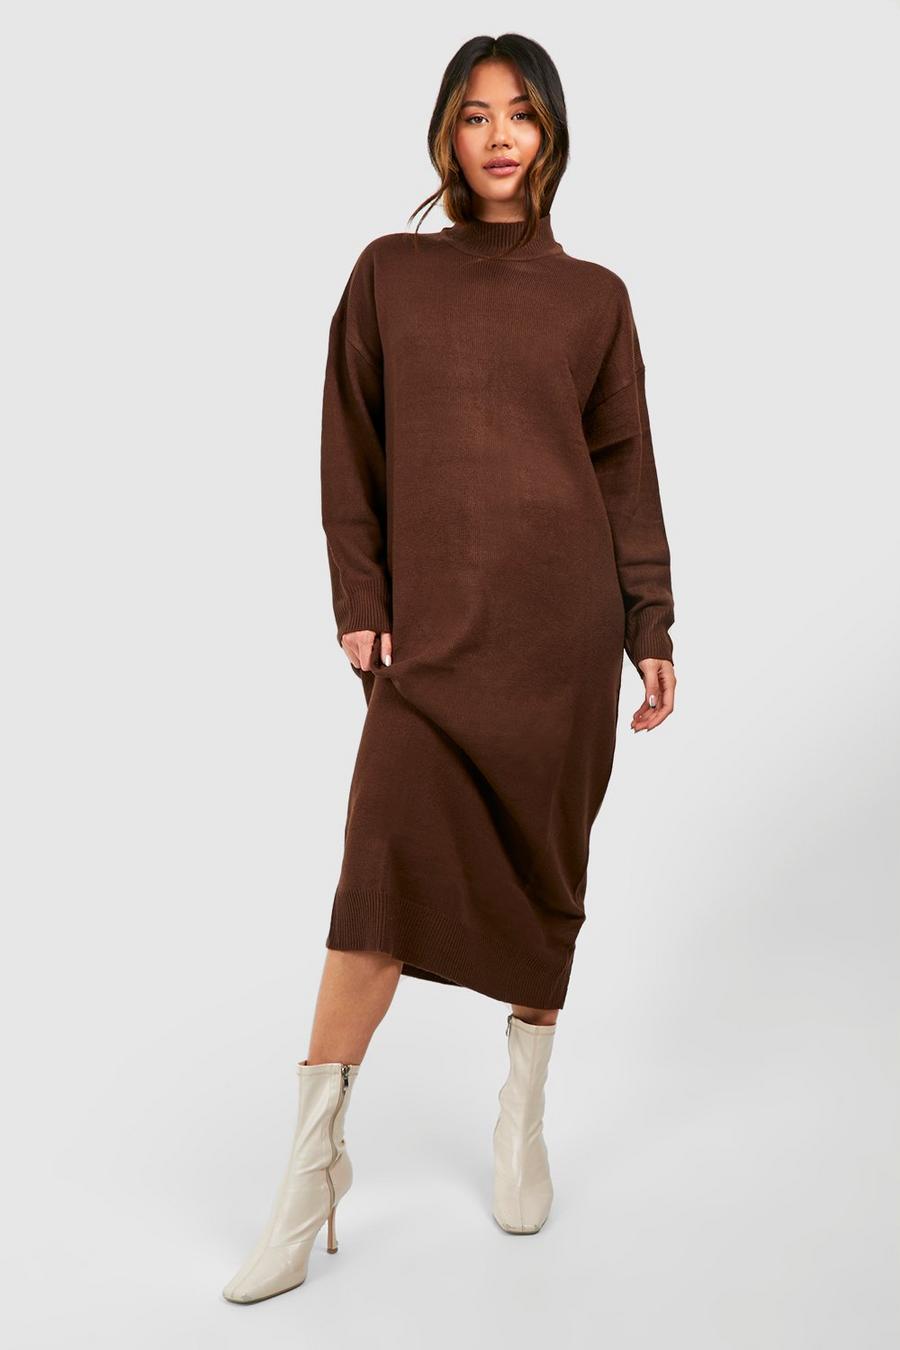 Chocolate High Neck Knitted Midaxi Dress